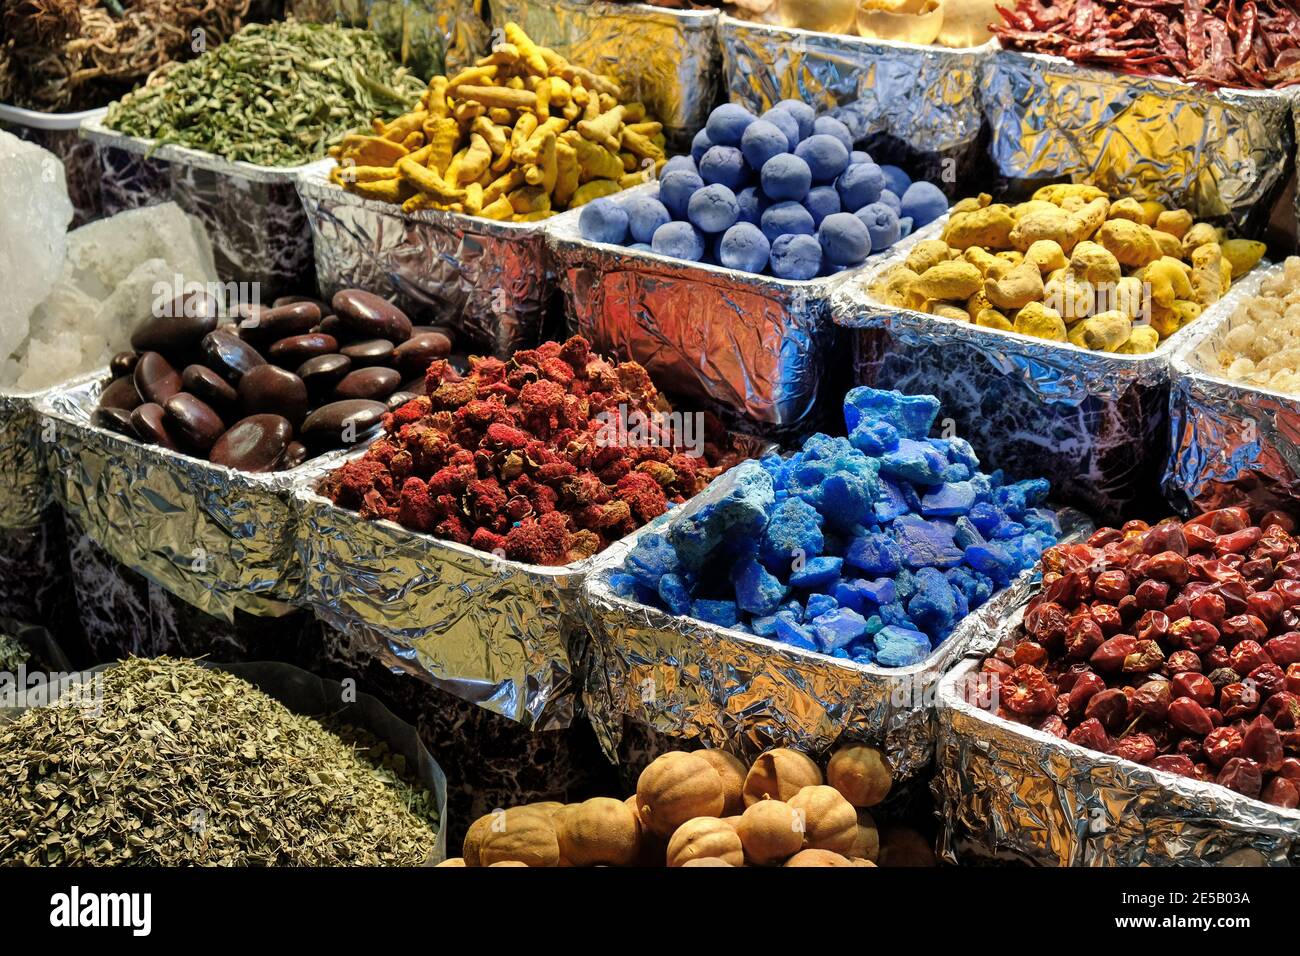 Herbs, spices, dried fruits, menthol crystals, blue dye at the old market in Dubai, United Arab Emirates. Stock Photo